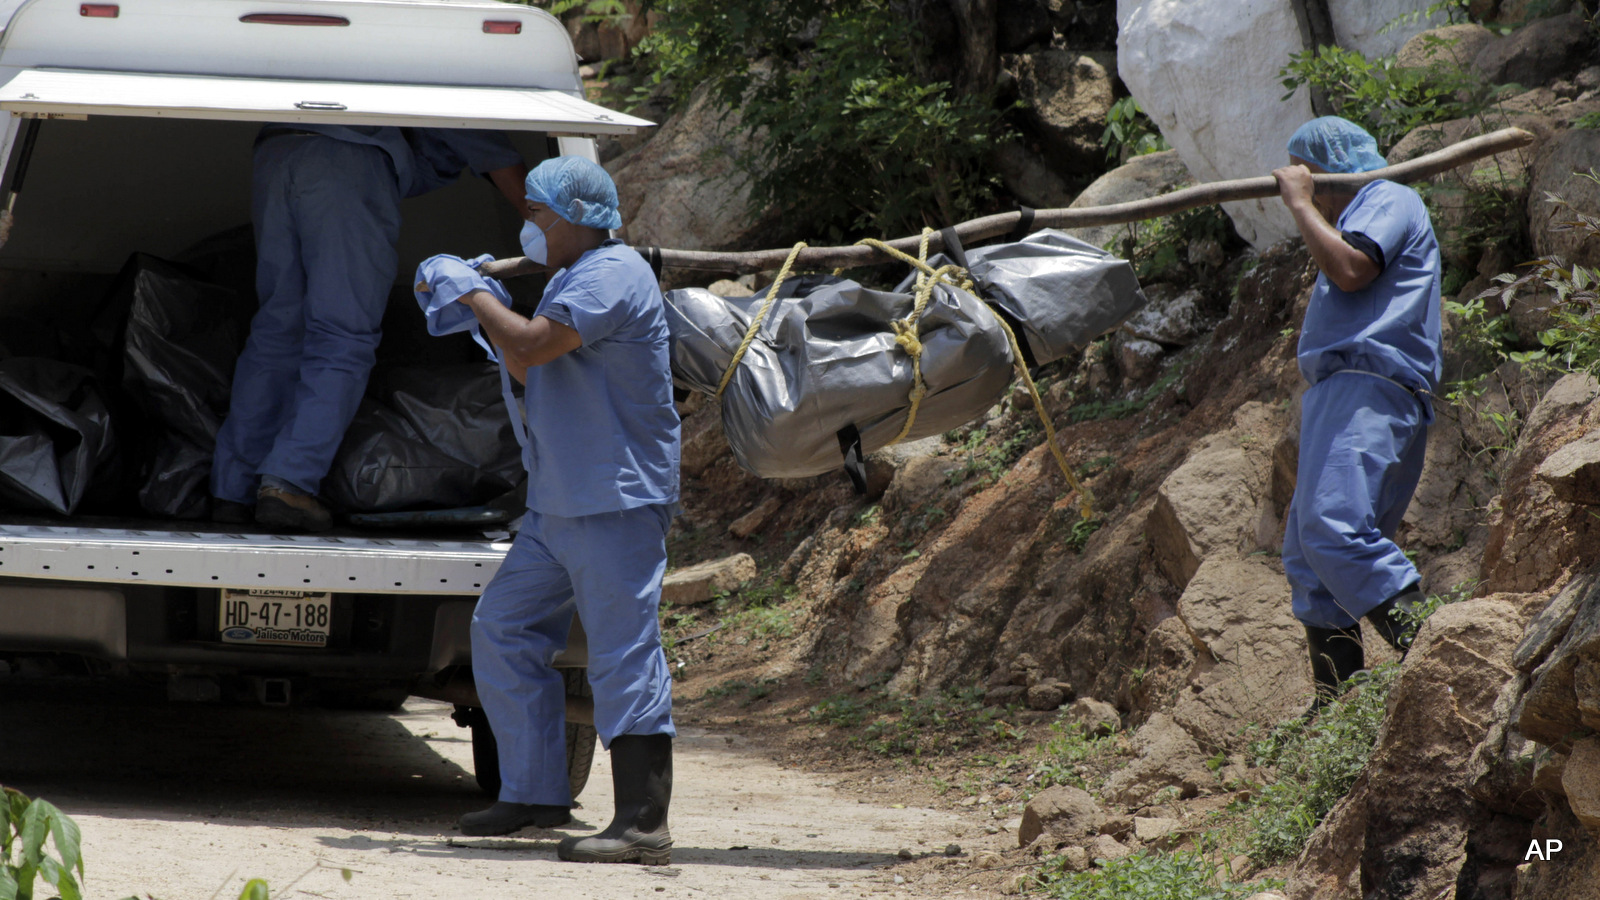 forensic workers load a body into a truck after at least 10 bodies were found in clandestine graves on the outskirts of the Pacific beach resort Acapulco, Mexico